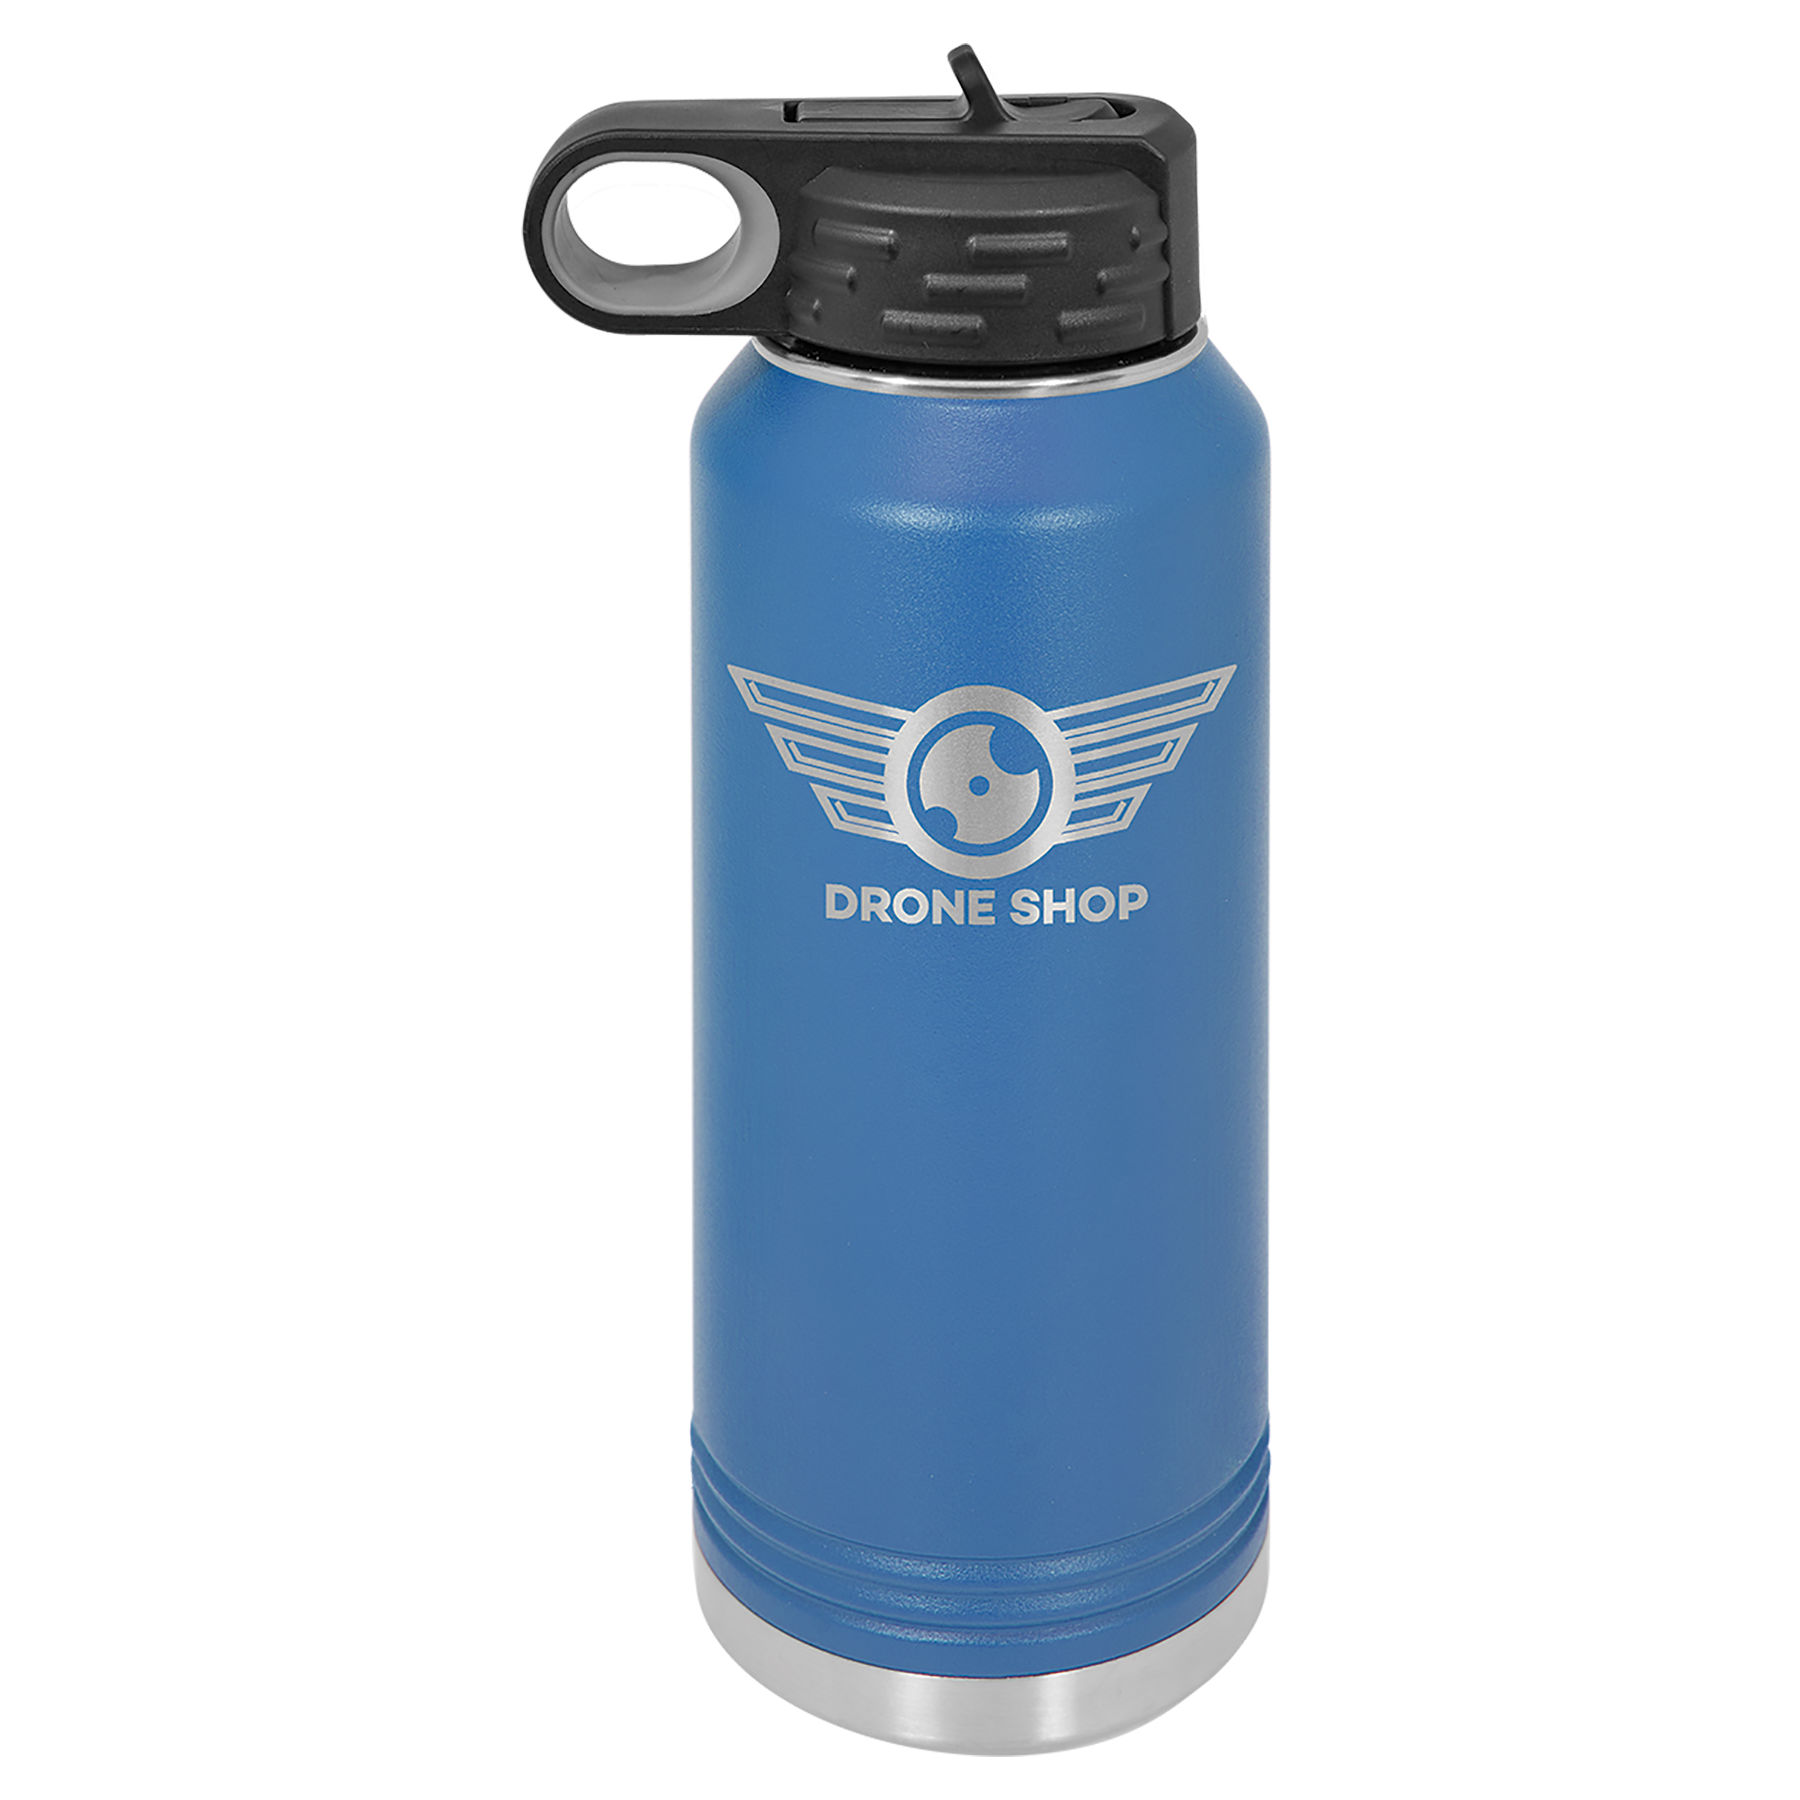 32 oz. Blue Stainless Steel Insulated Water Bottler.  Customizable with your personal image or saying.